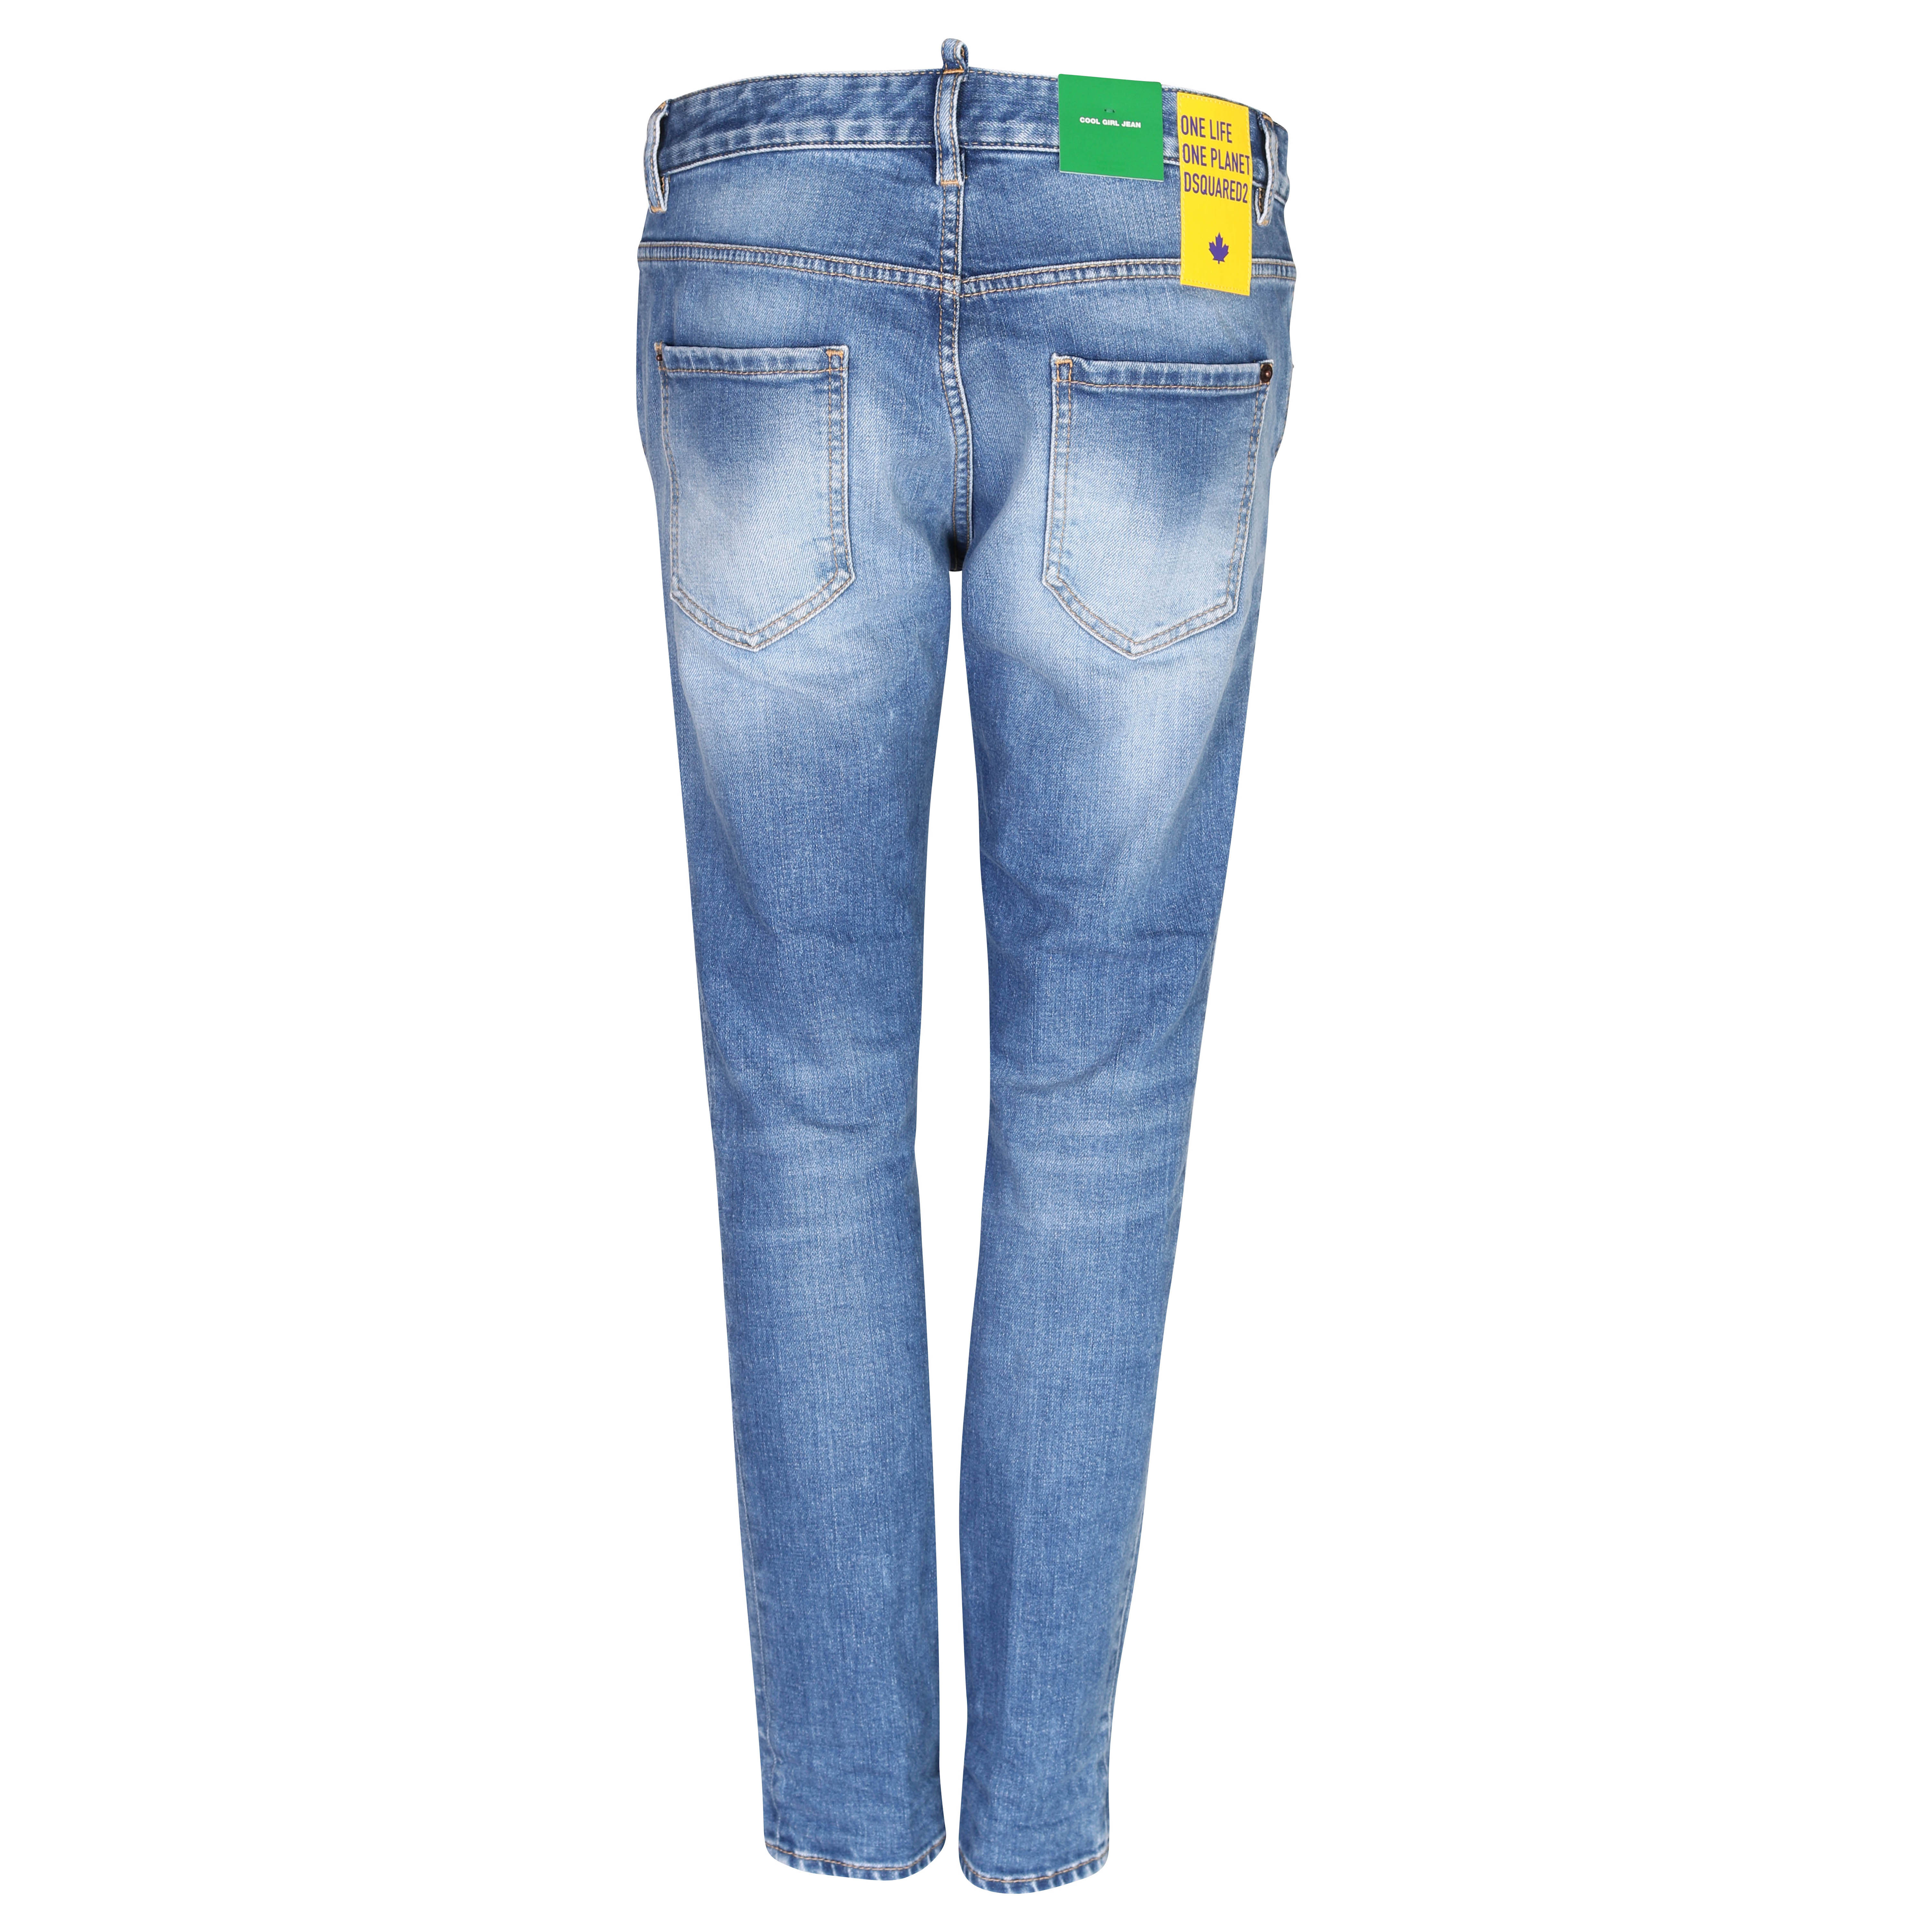 DSQUARED2 Green Label Cool Girl Jeans in Washed Light Blue